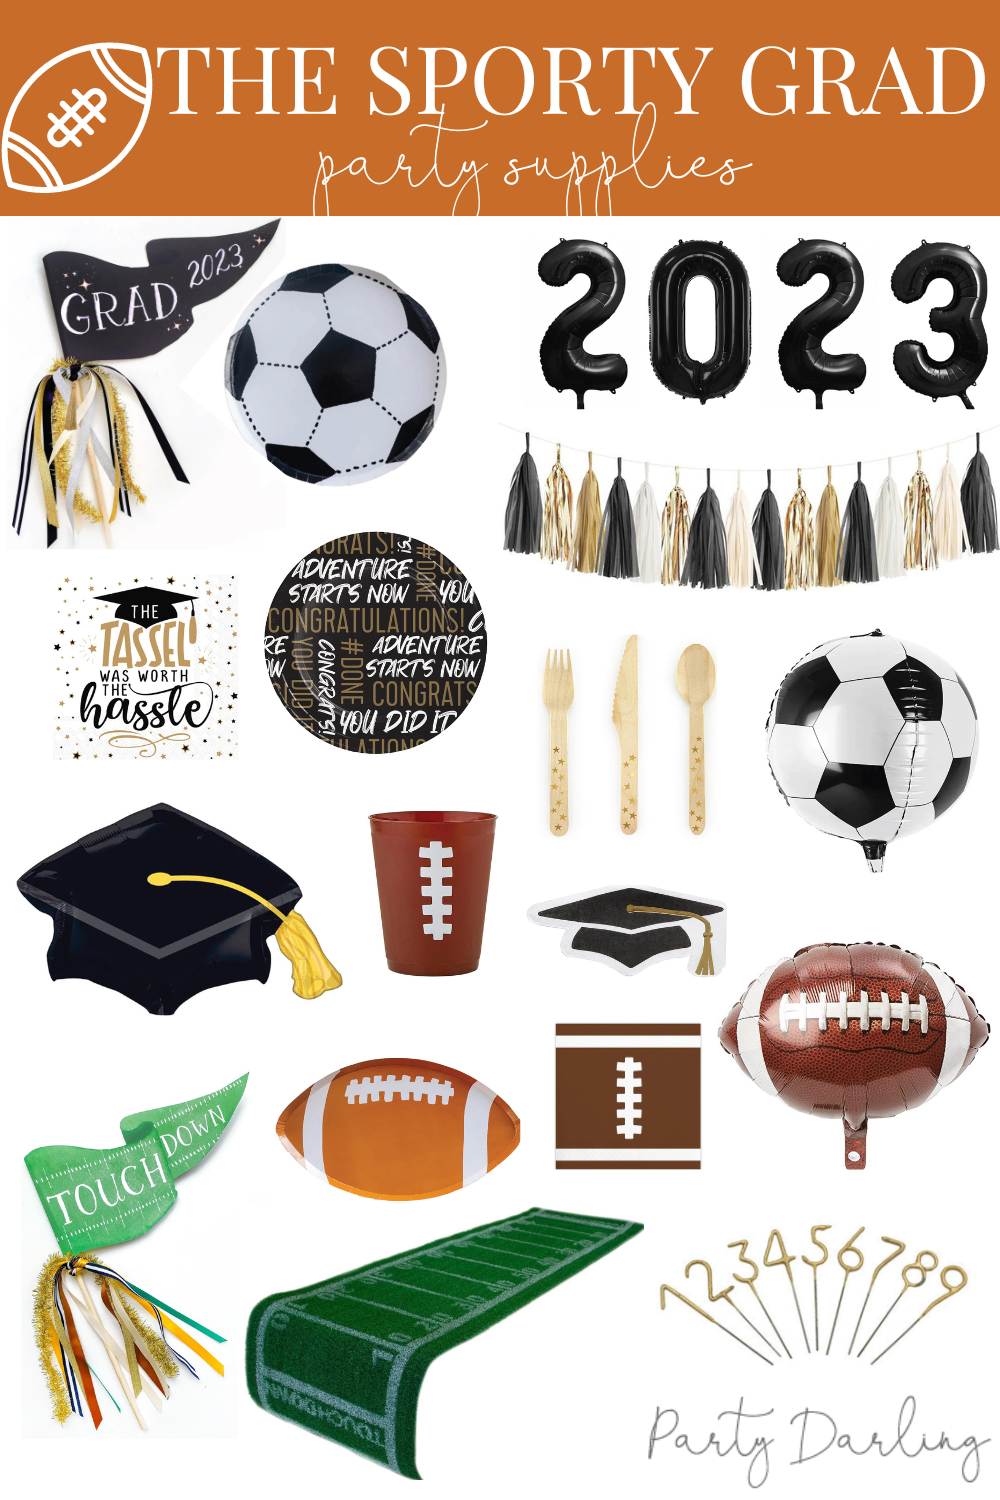 Game Day Sport Theme Football Party Decorations Touchdown Party Decorations-include Happy Birthday Banners,Football Garland,2 Foil Fringe Curtains